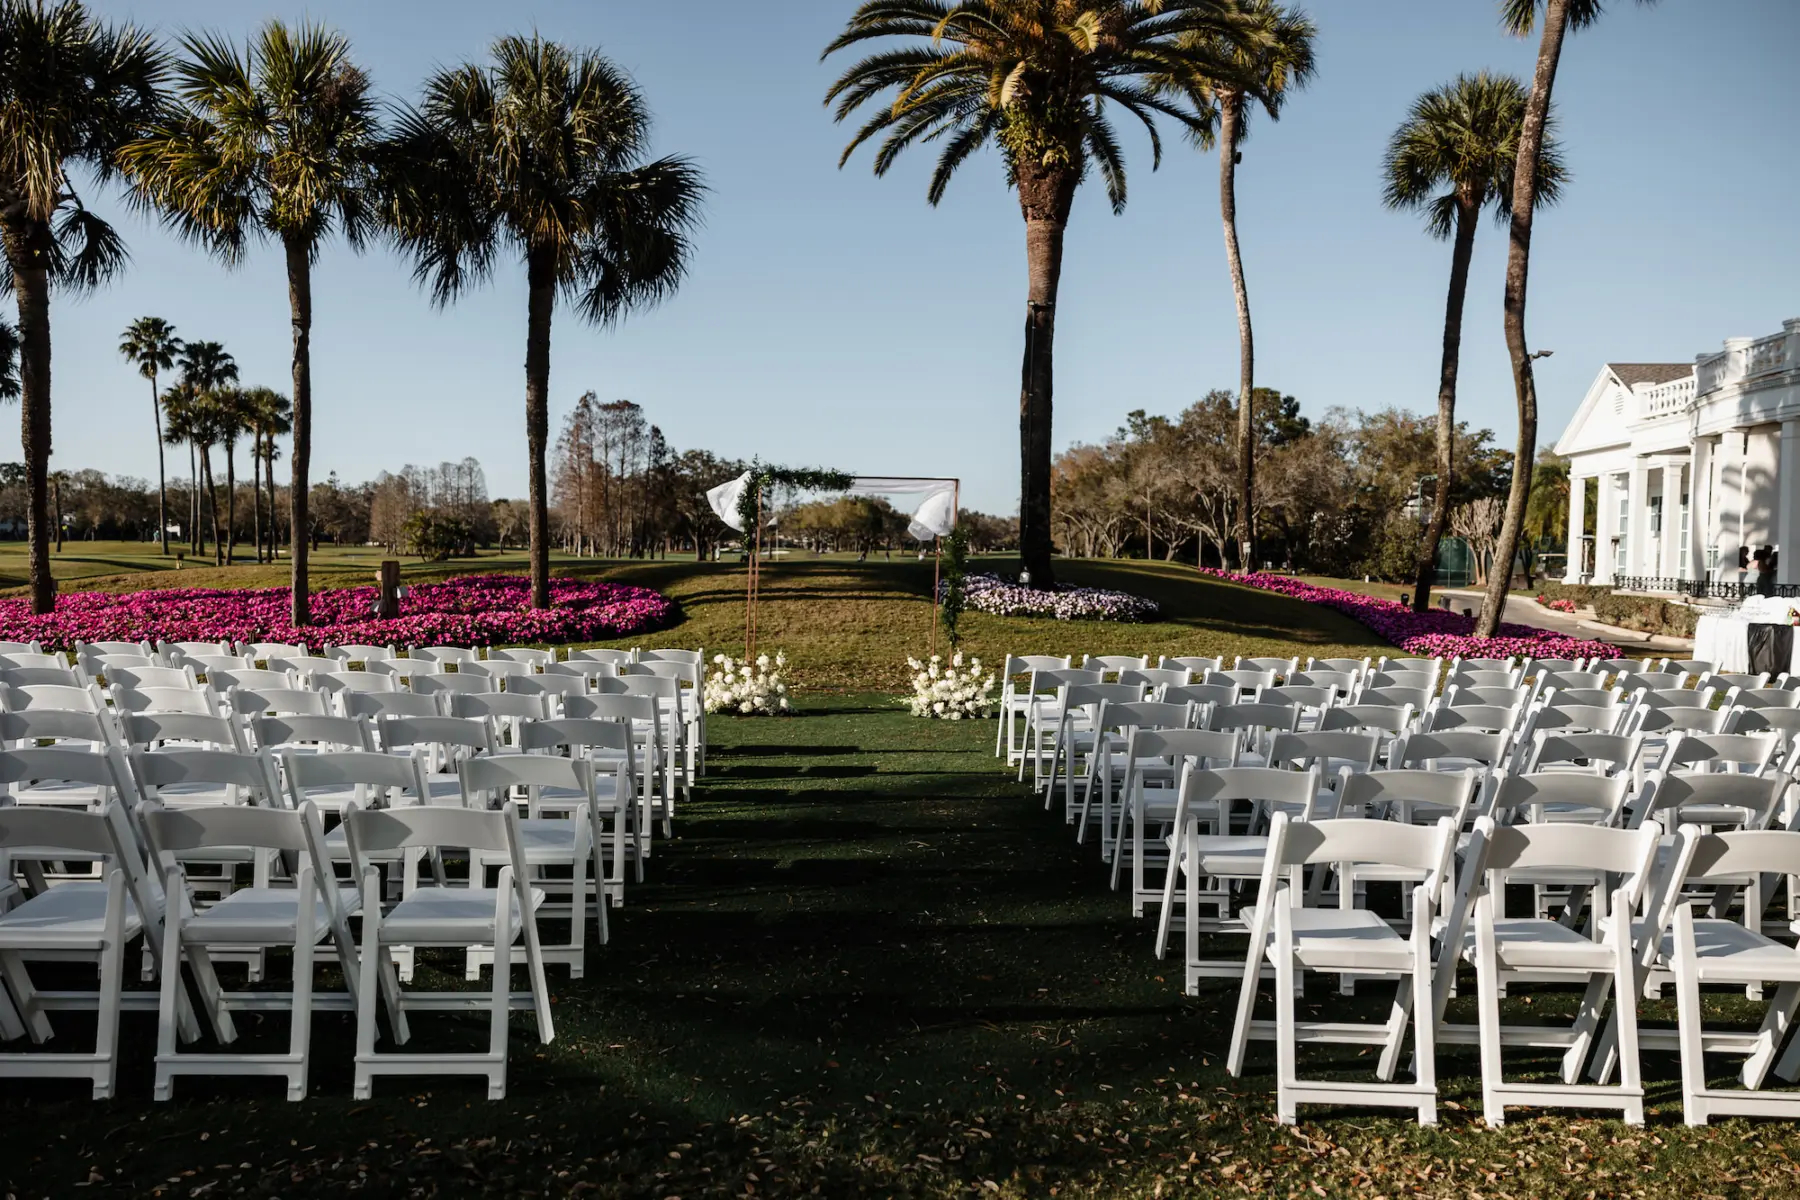 Spring Outdoor Golf Course Wedding Ceremony Inspiration | White Folding Garden Chairs | South Tampa Venue Palma Ceia Golf and Country Club